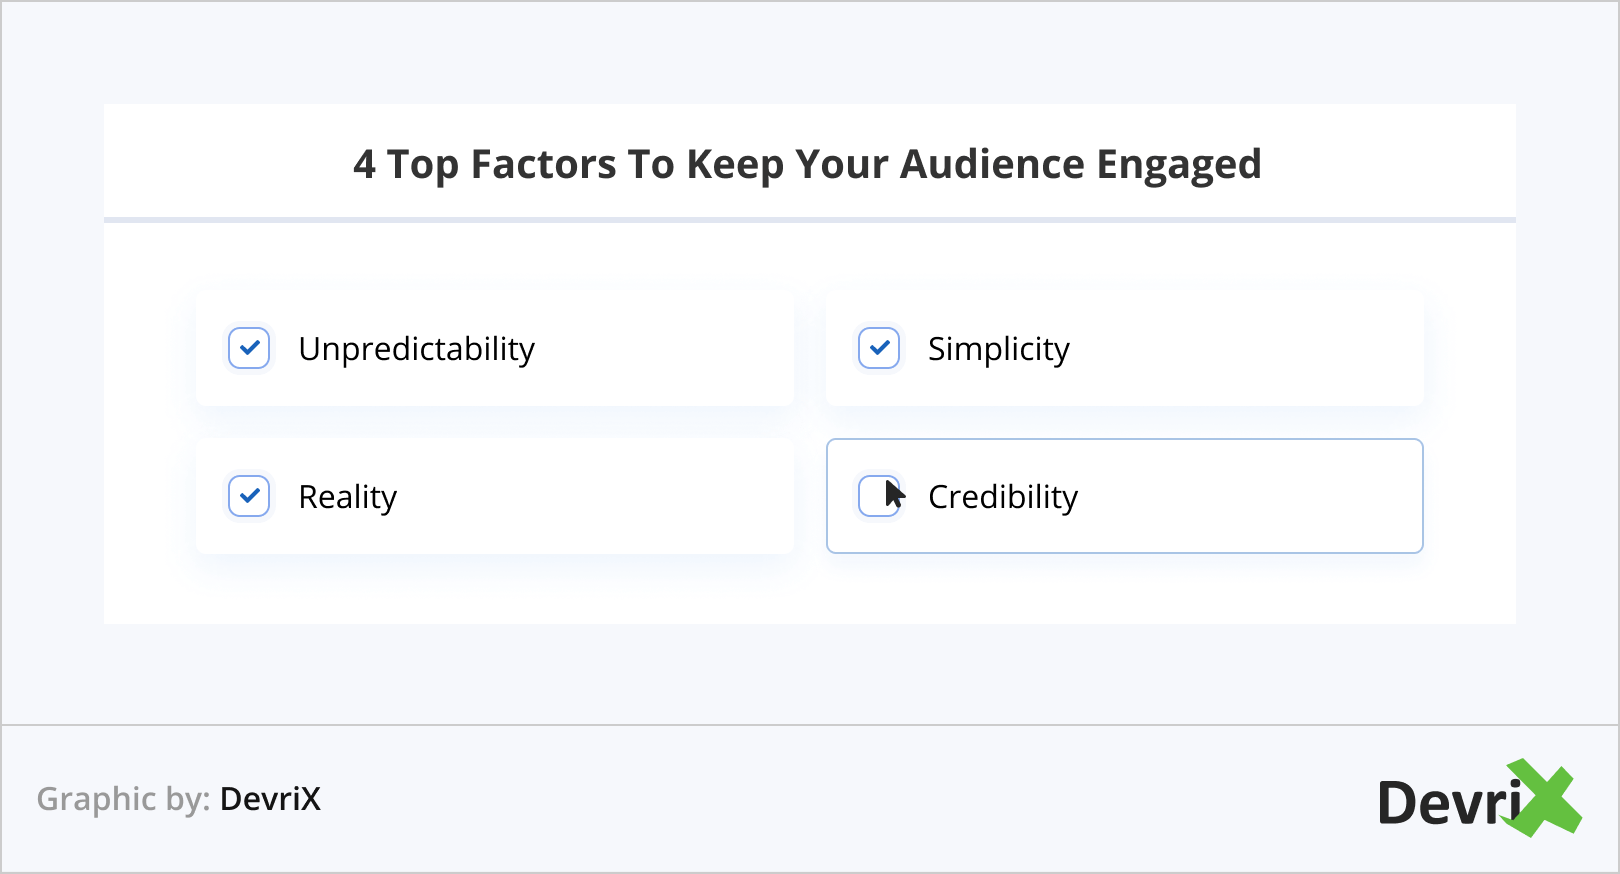 4 Top Factors To Keep Your Audience Engaged